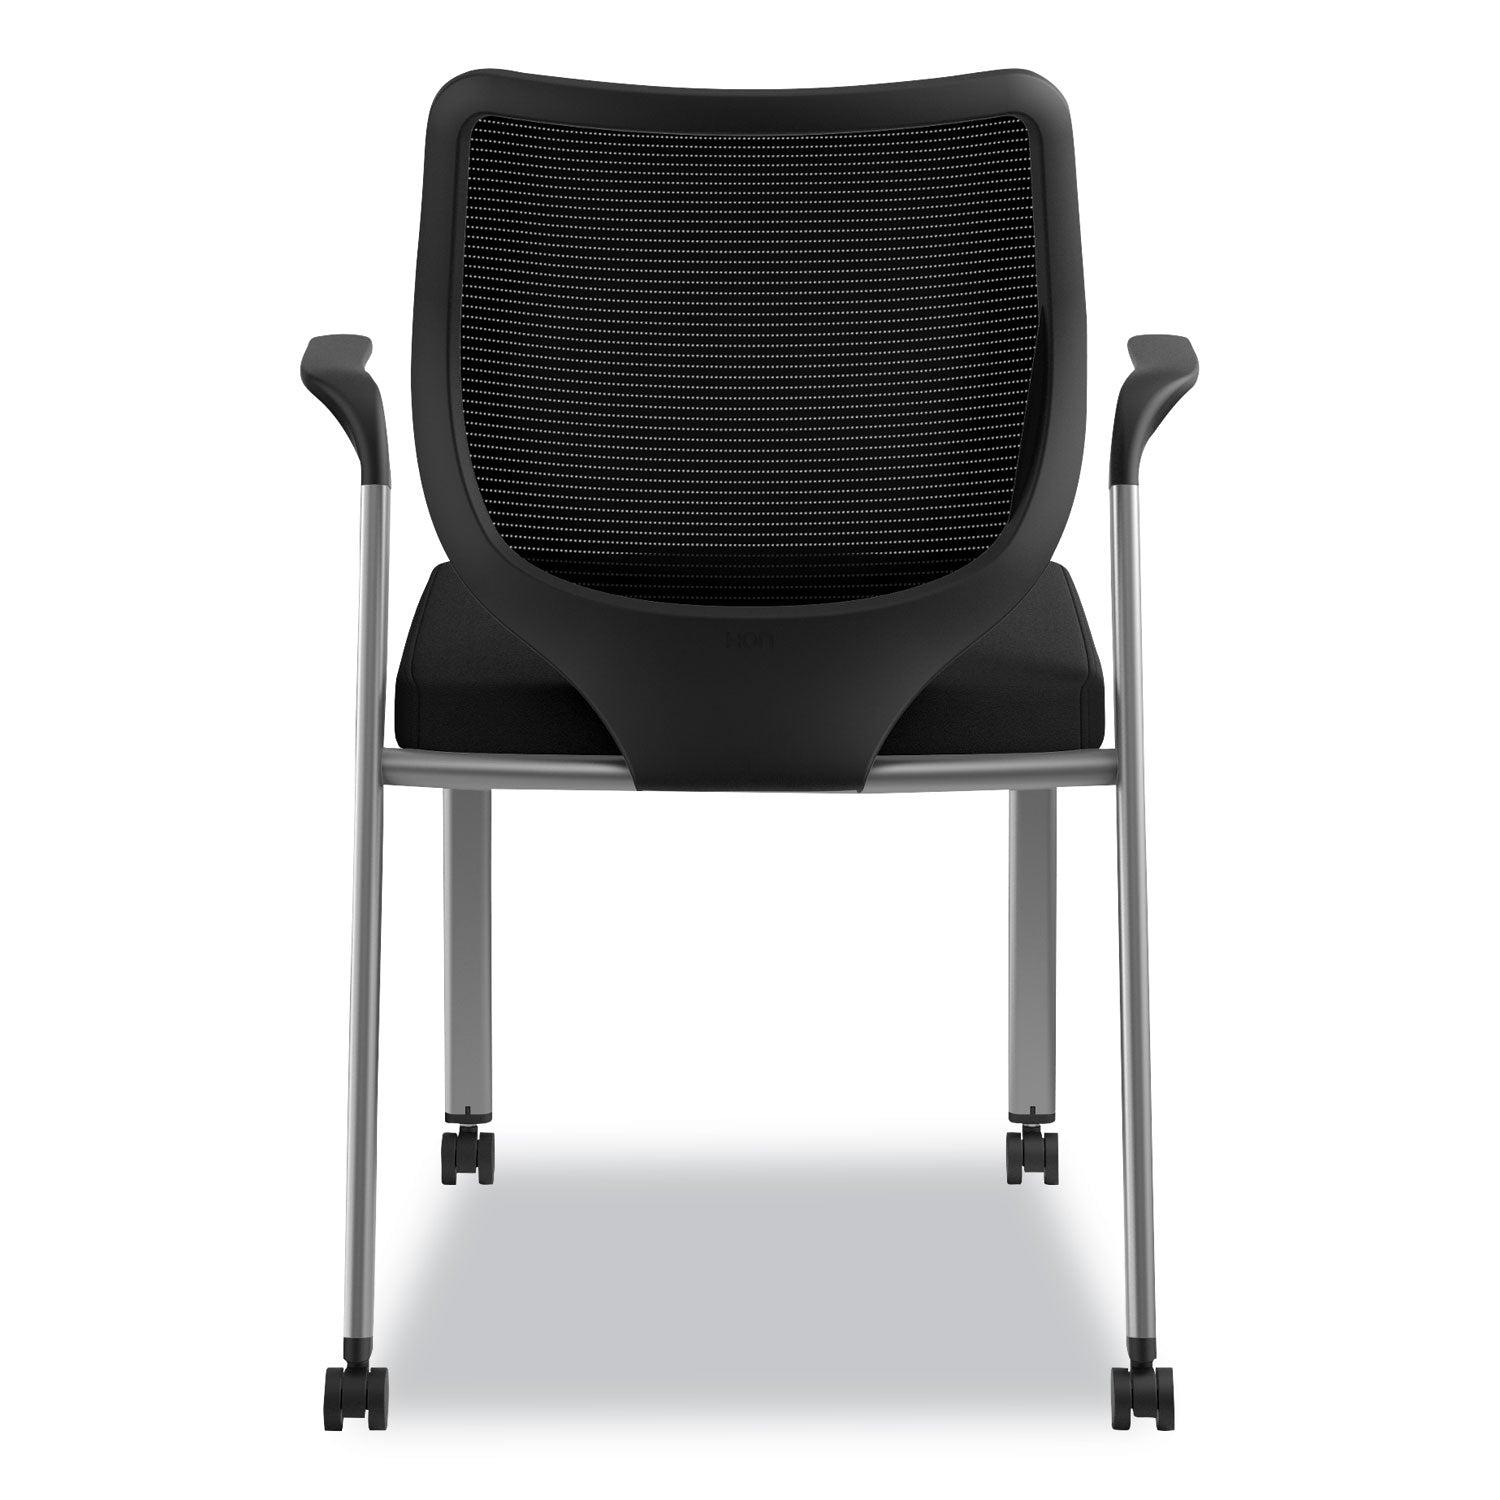 nucleus-series-multipurpose-stacking-chair-with-ilira-stretch-m4-back-supports-up-to-300-lb-black-seat-back-platinum-base_honn606hcu10t1 - 7